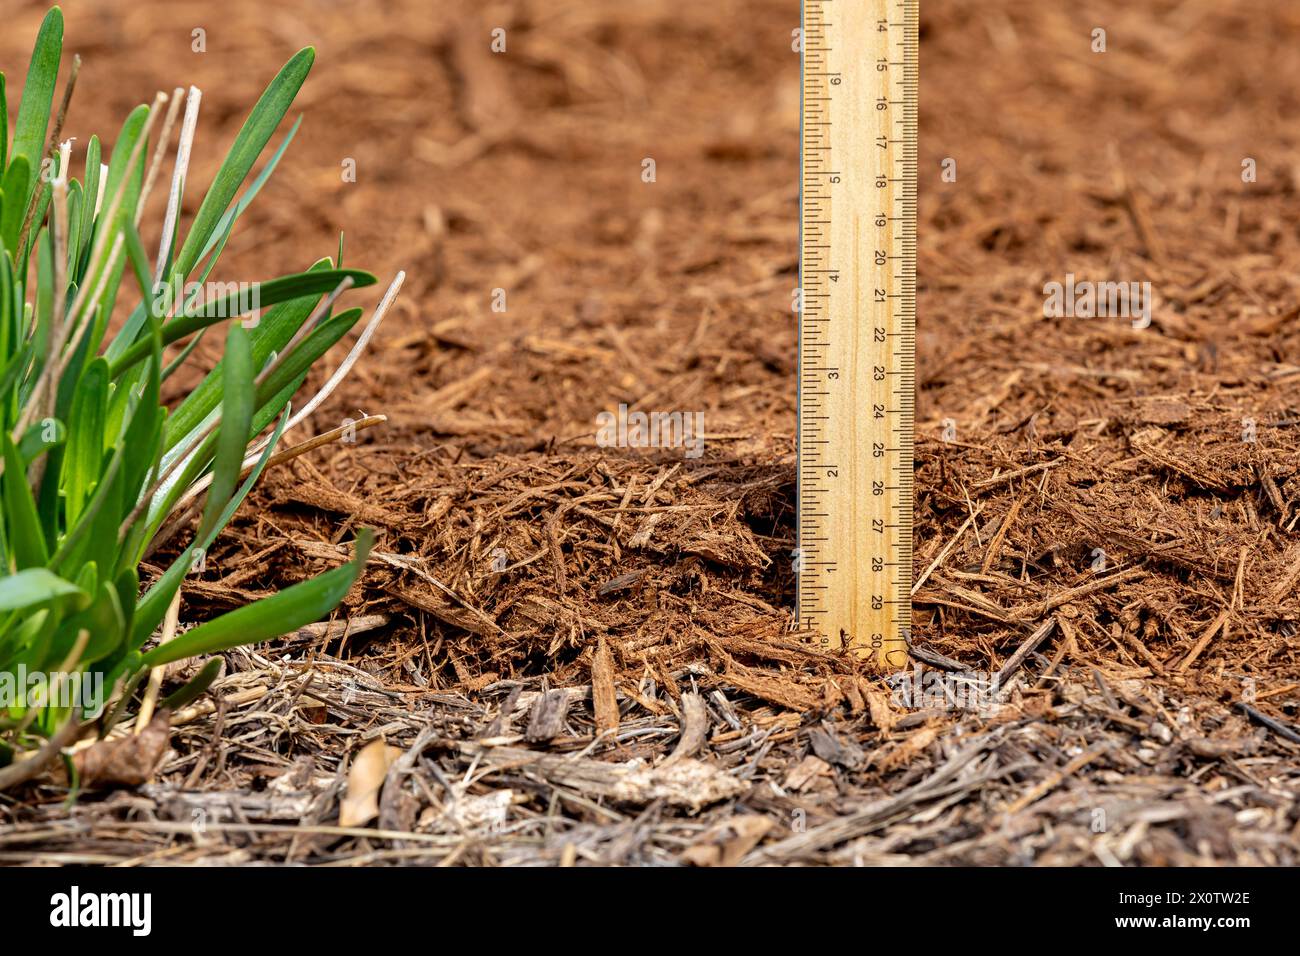 Measuring the depth of wood mulch in flowerbed. Lawncare, gardening and backyard landscaping concept. Stock Photo